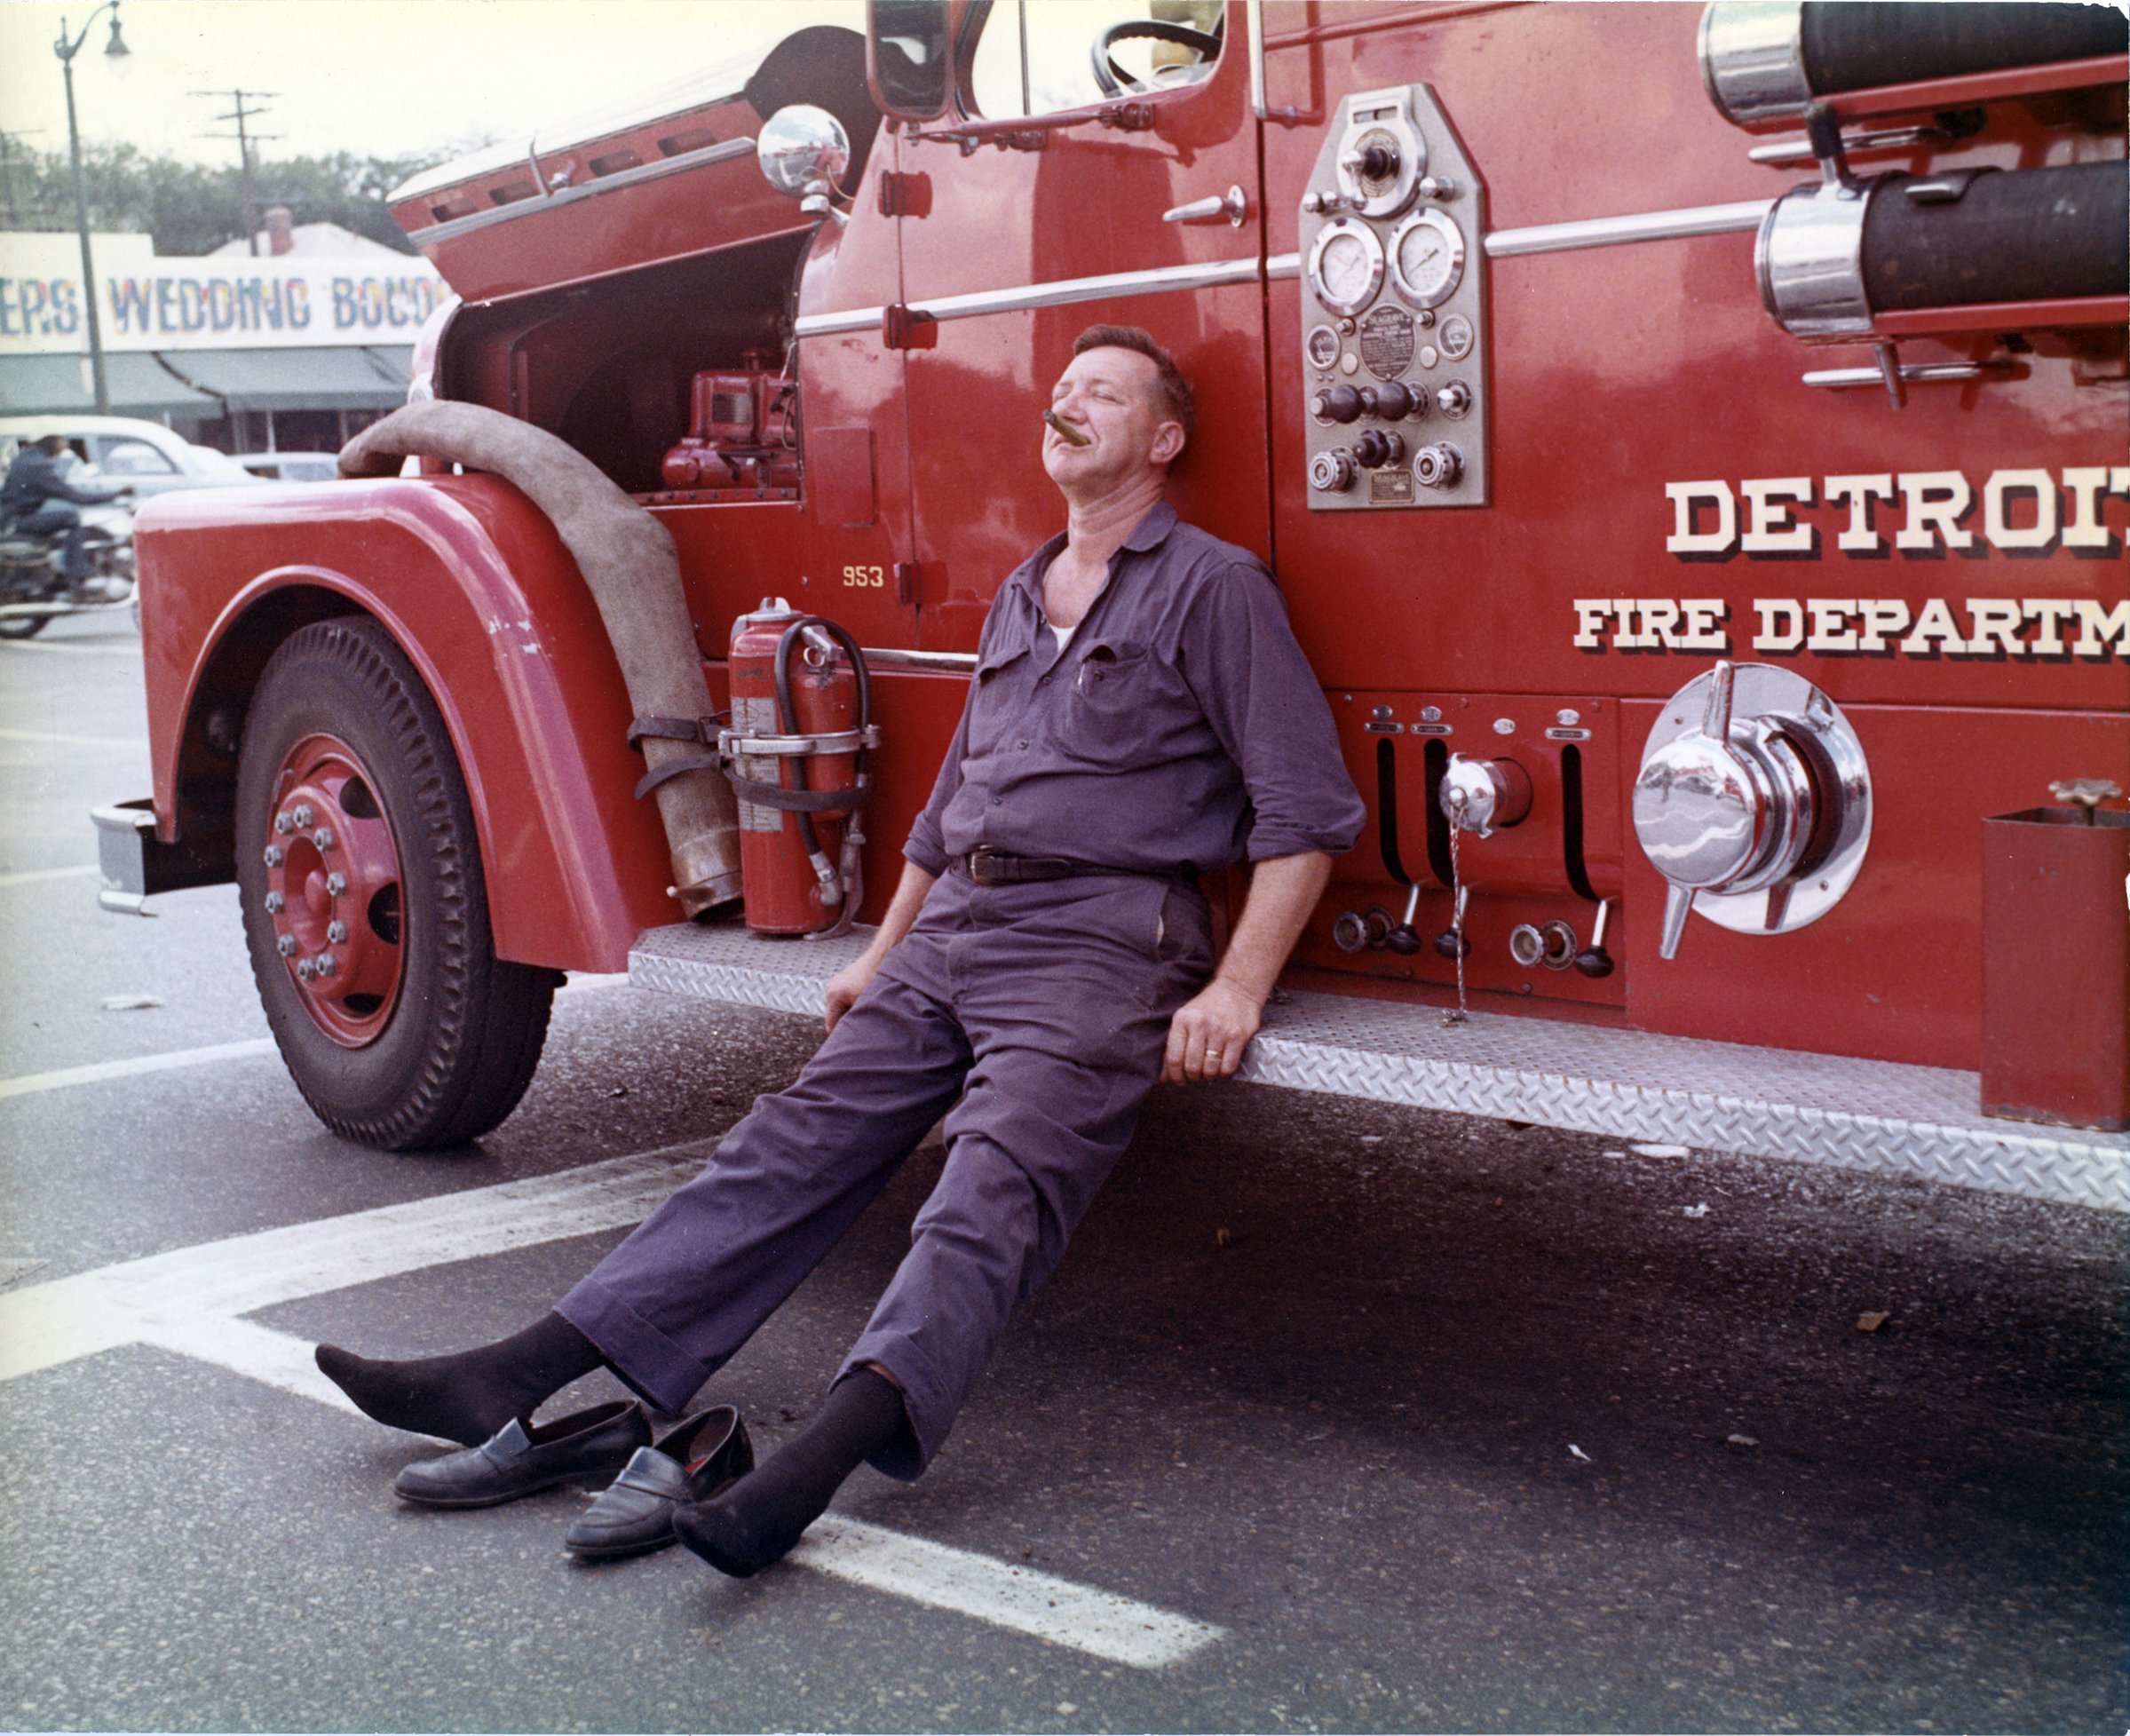 A Detroit firefighter collapses against the side of a department vehicle after battling one of the 1,609 structures that were damaged in the city during the July ’67 protests.